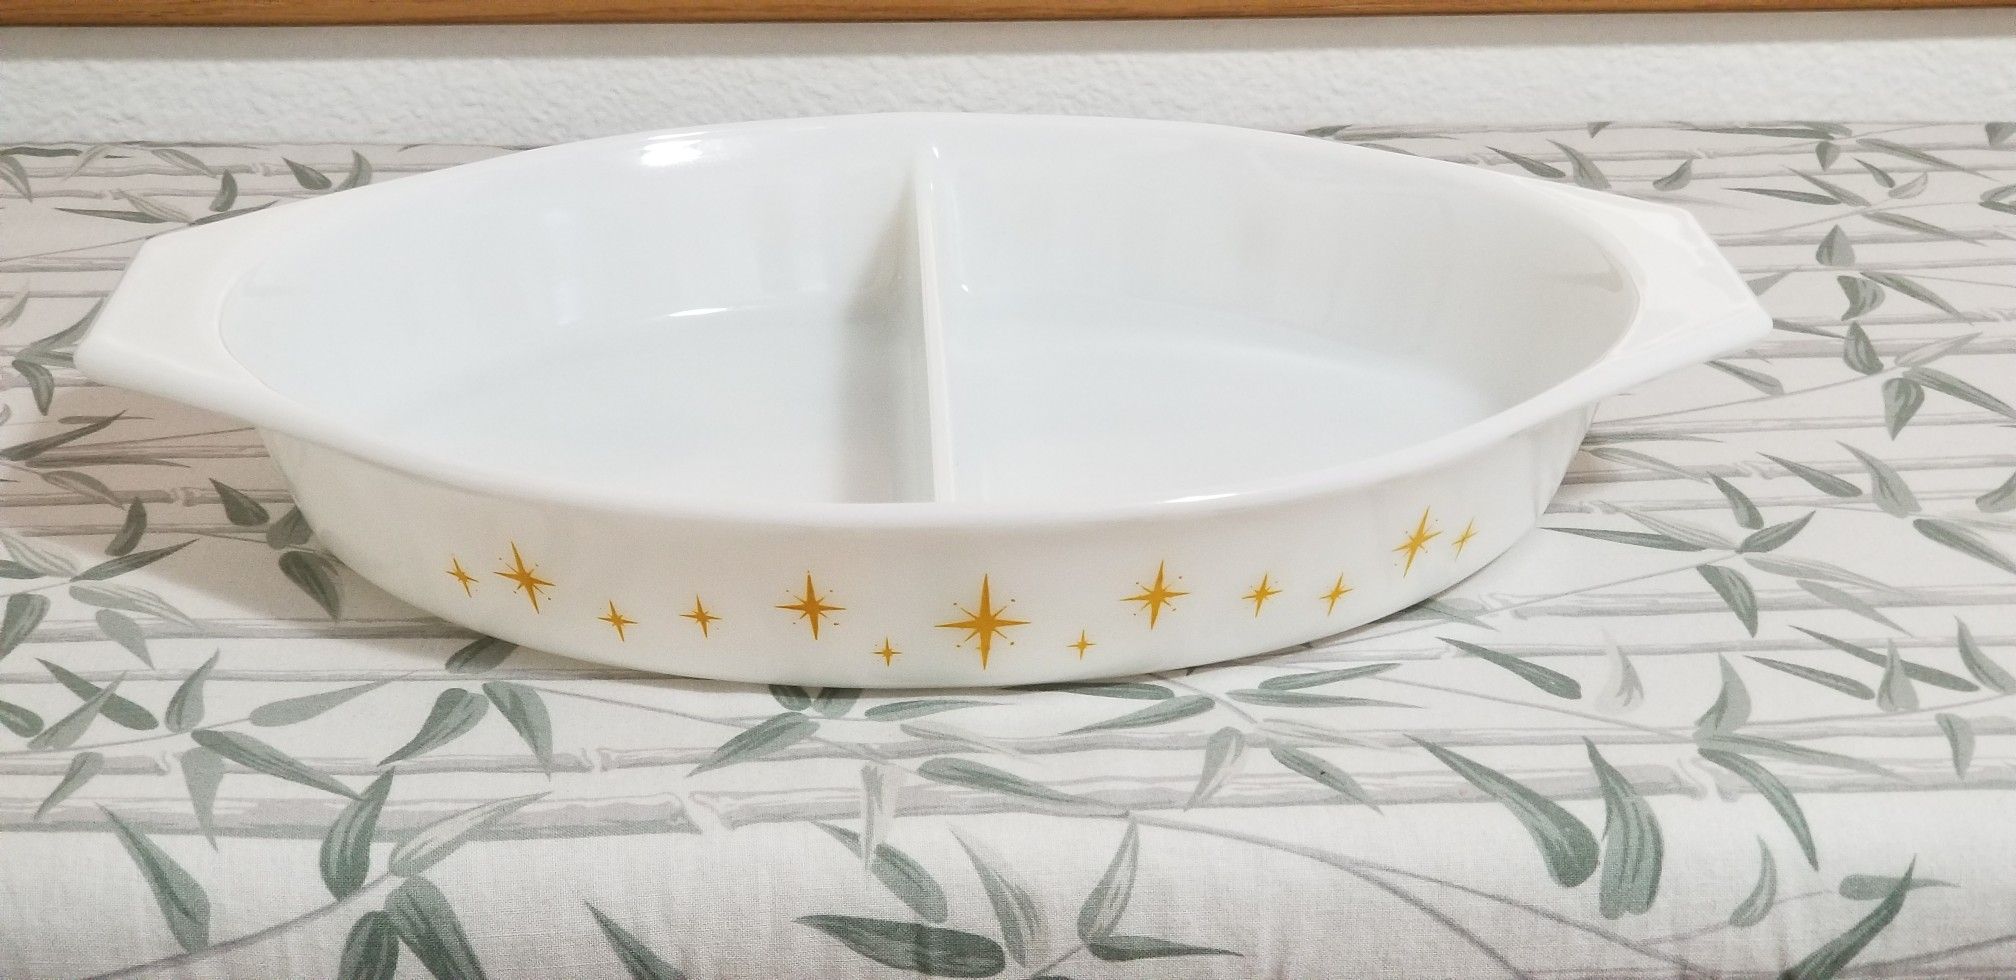 Pyrex Constellation divided dish